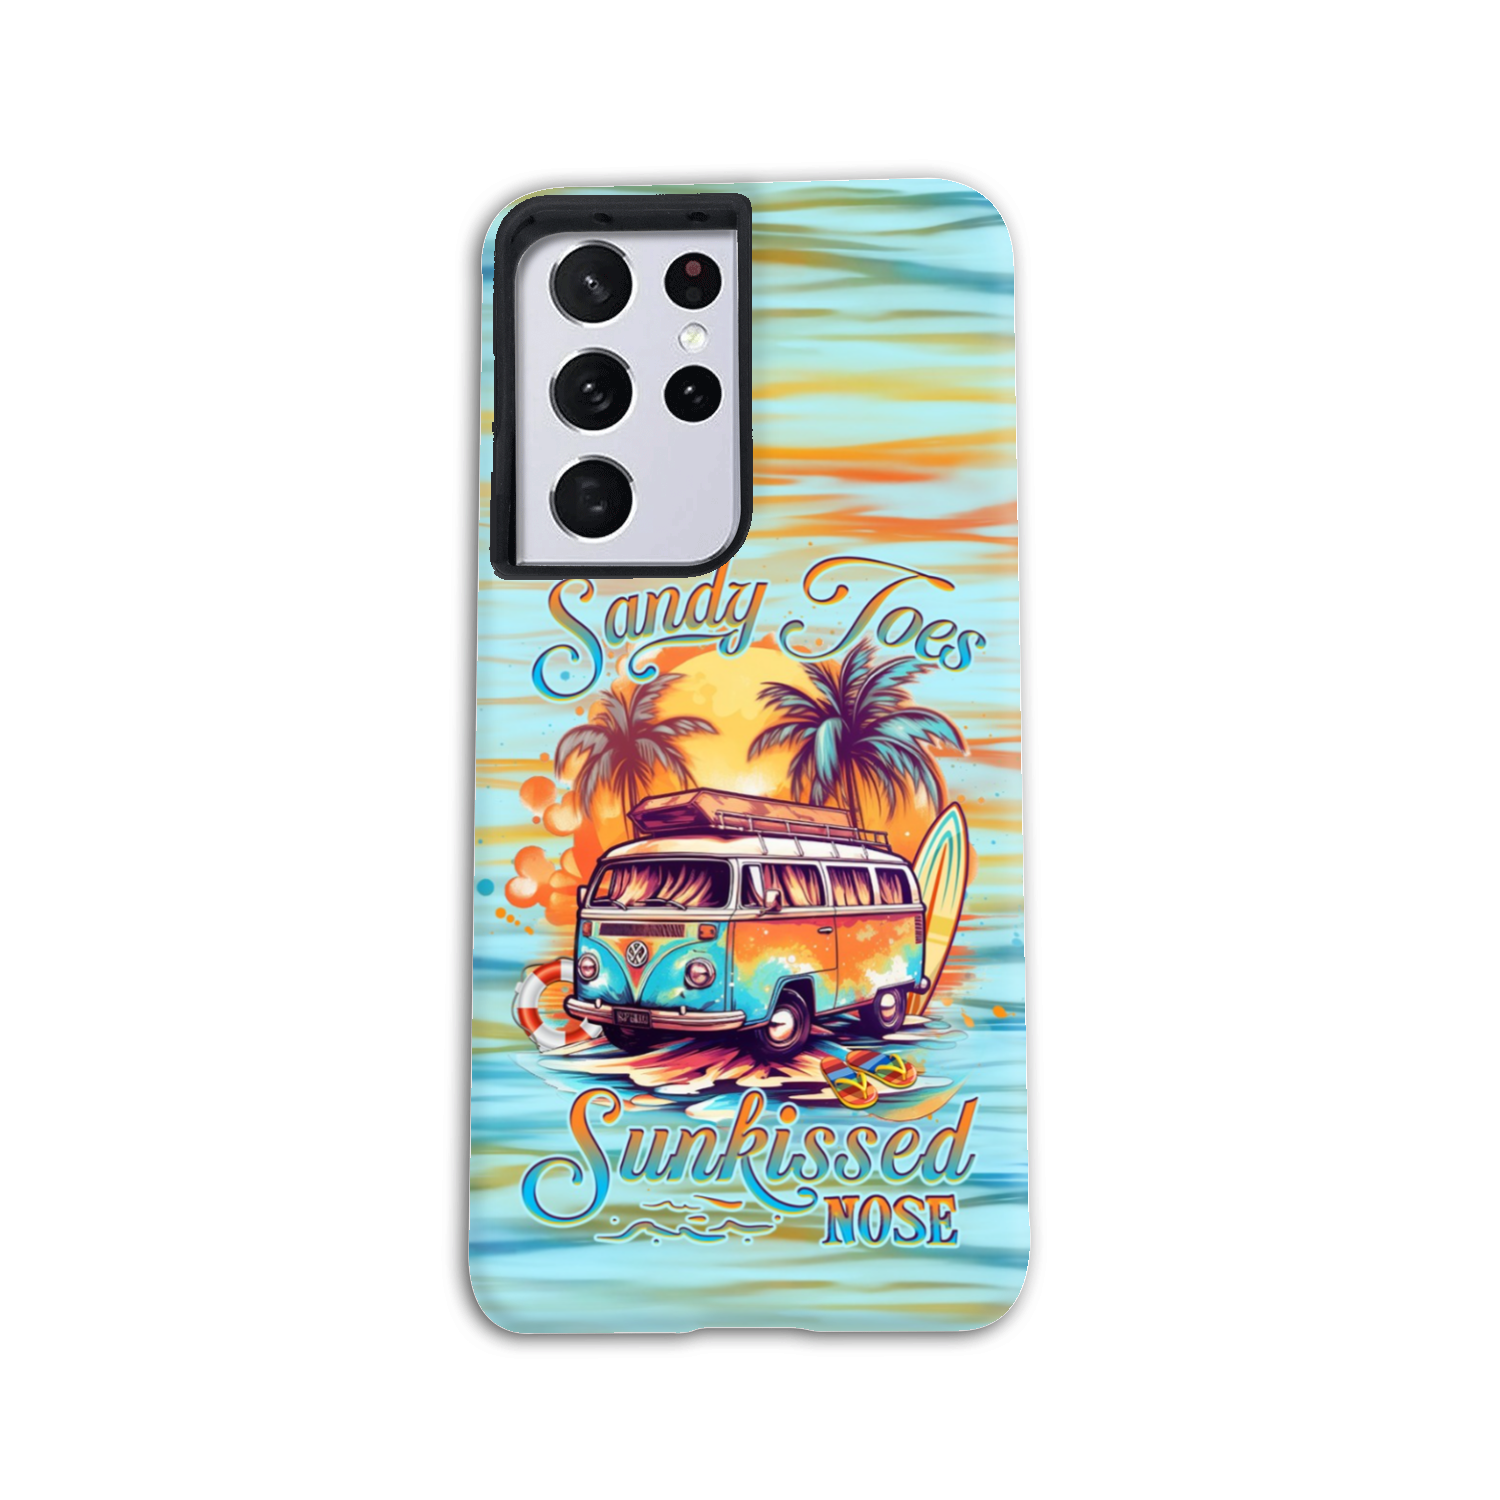 SANDY TOES SUNKISSED NOSE PHONE CASE - YHHG2405234